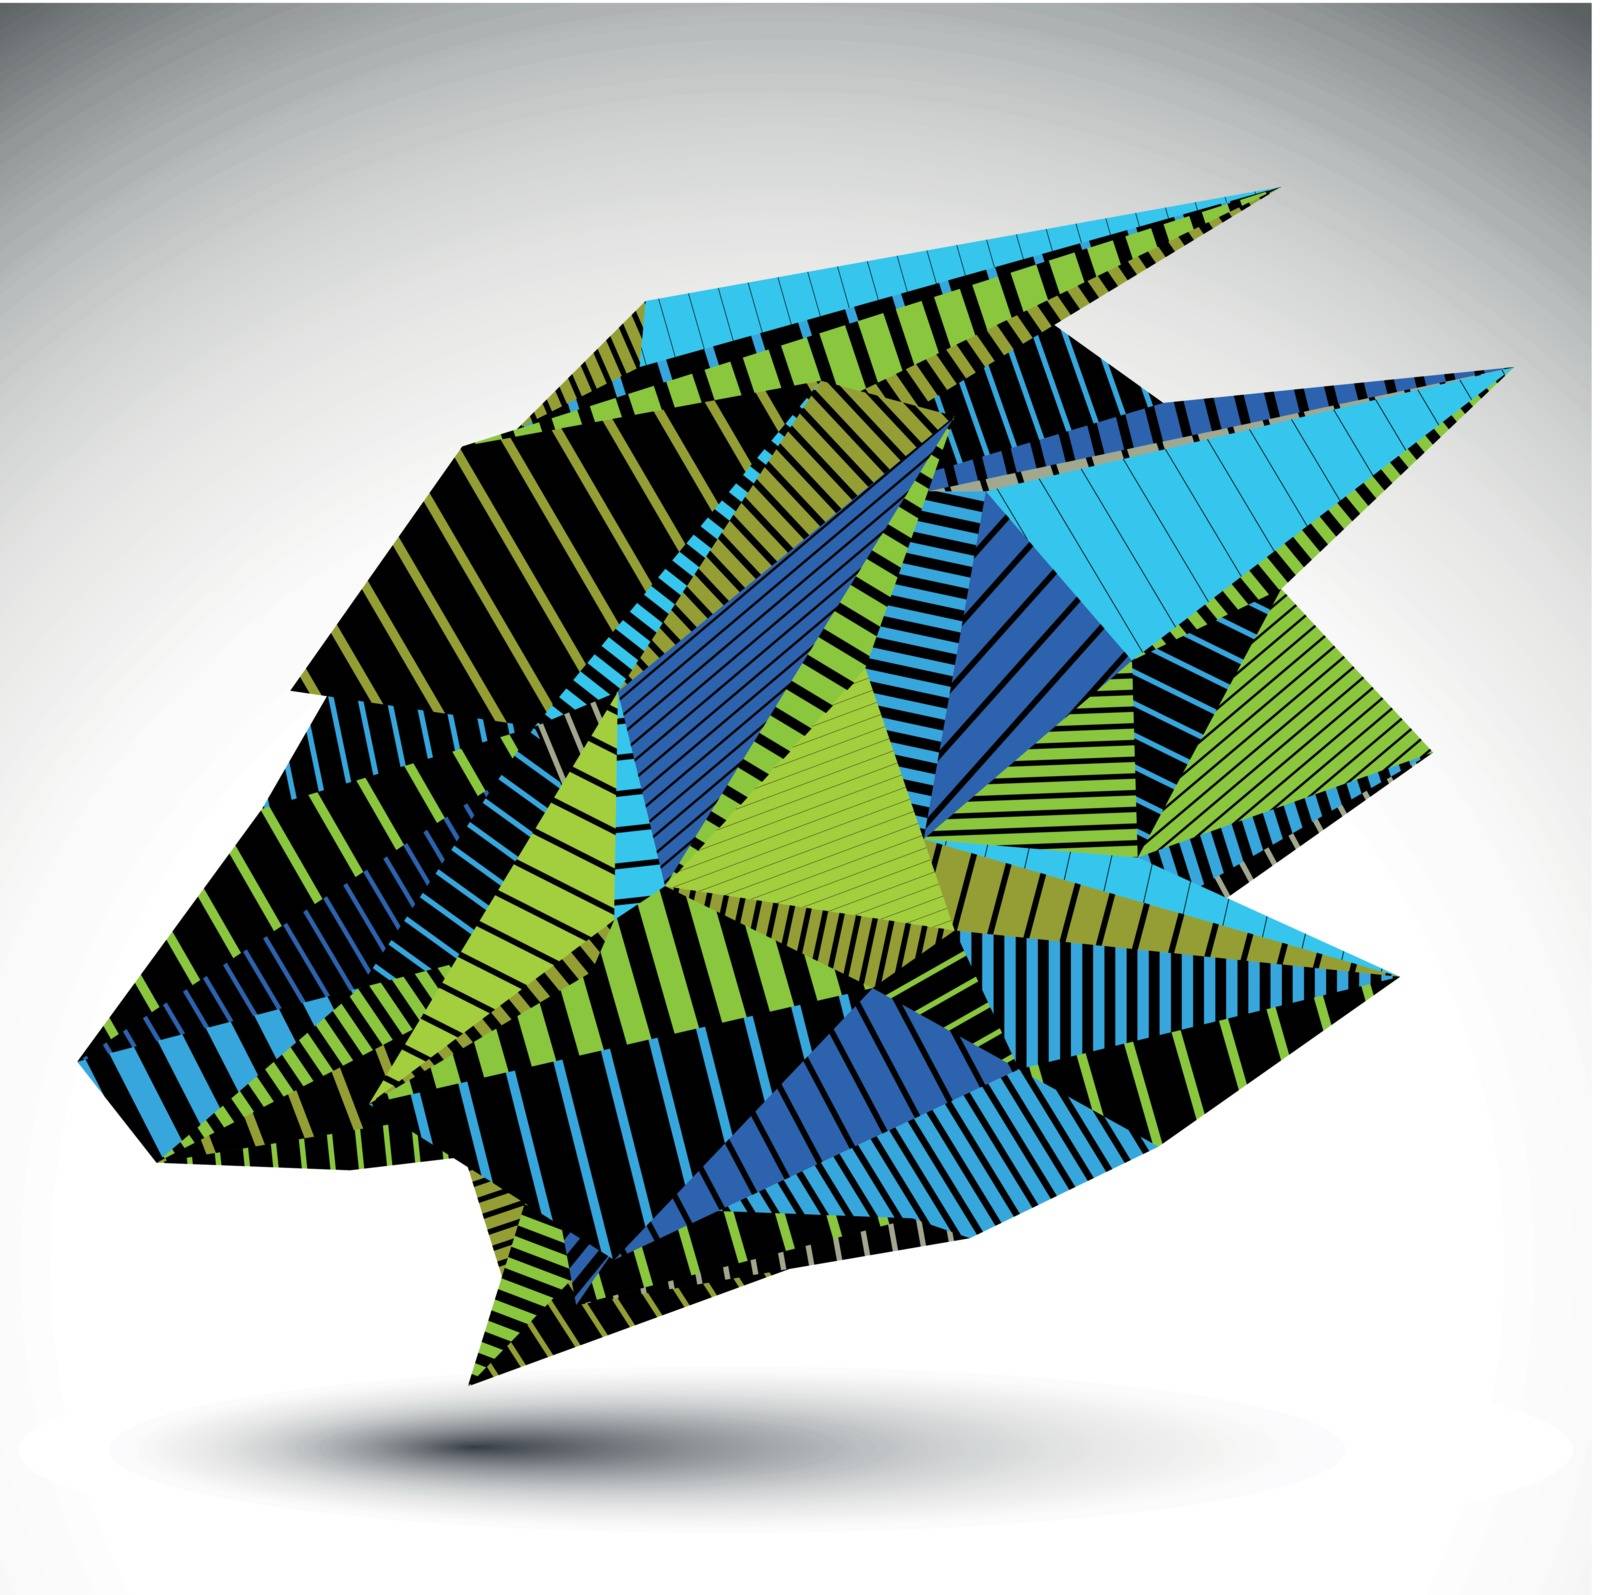 Complicated contrast eps8 figure constructed from triangles with parallel lines. Cybernetic striped sharp element, Bright asymmetric illustration for technology projects.